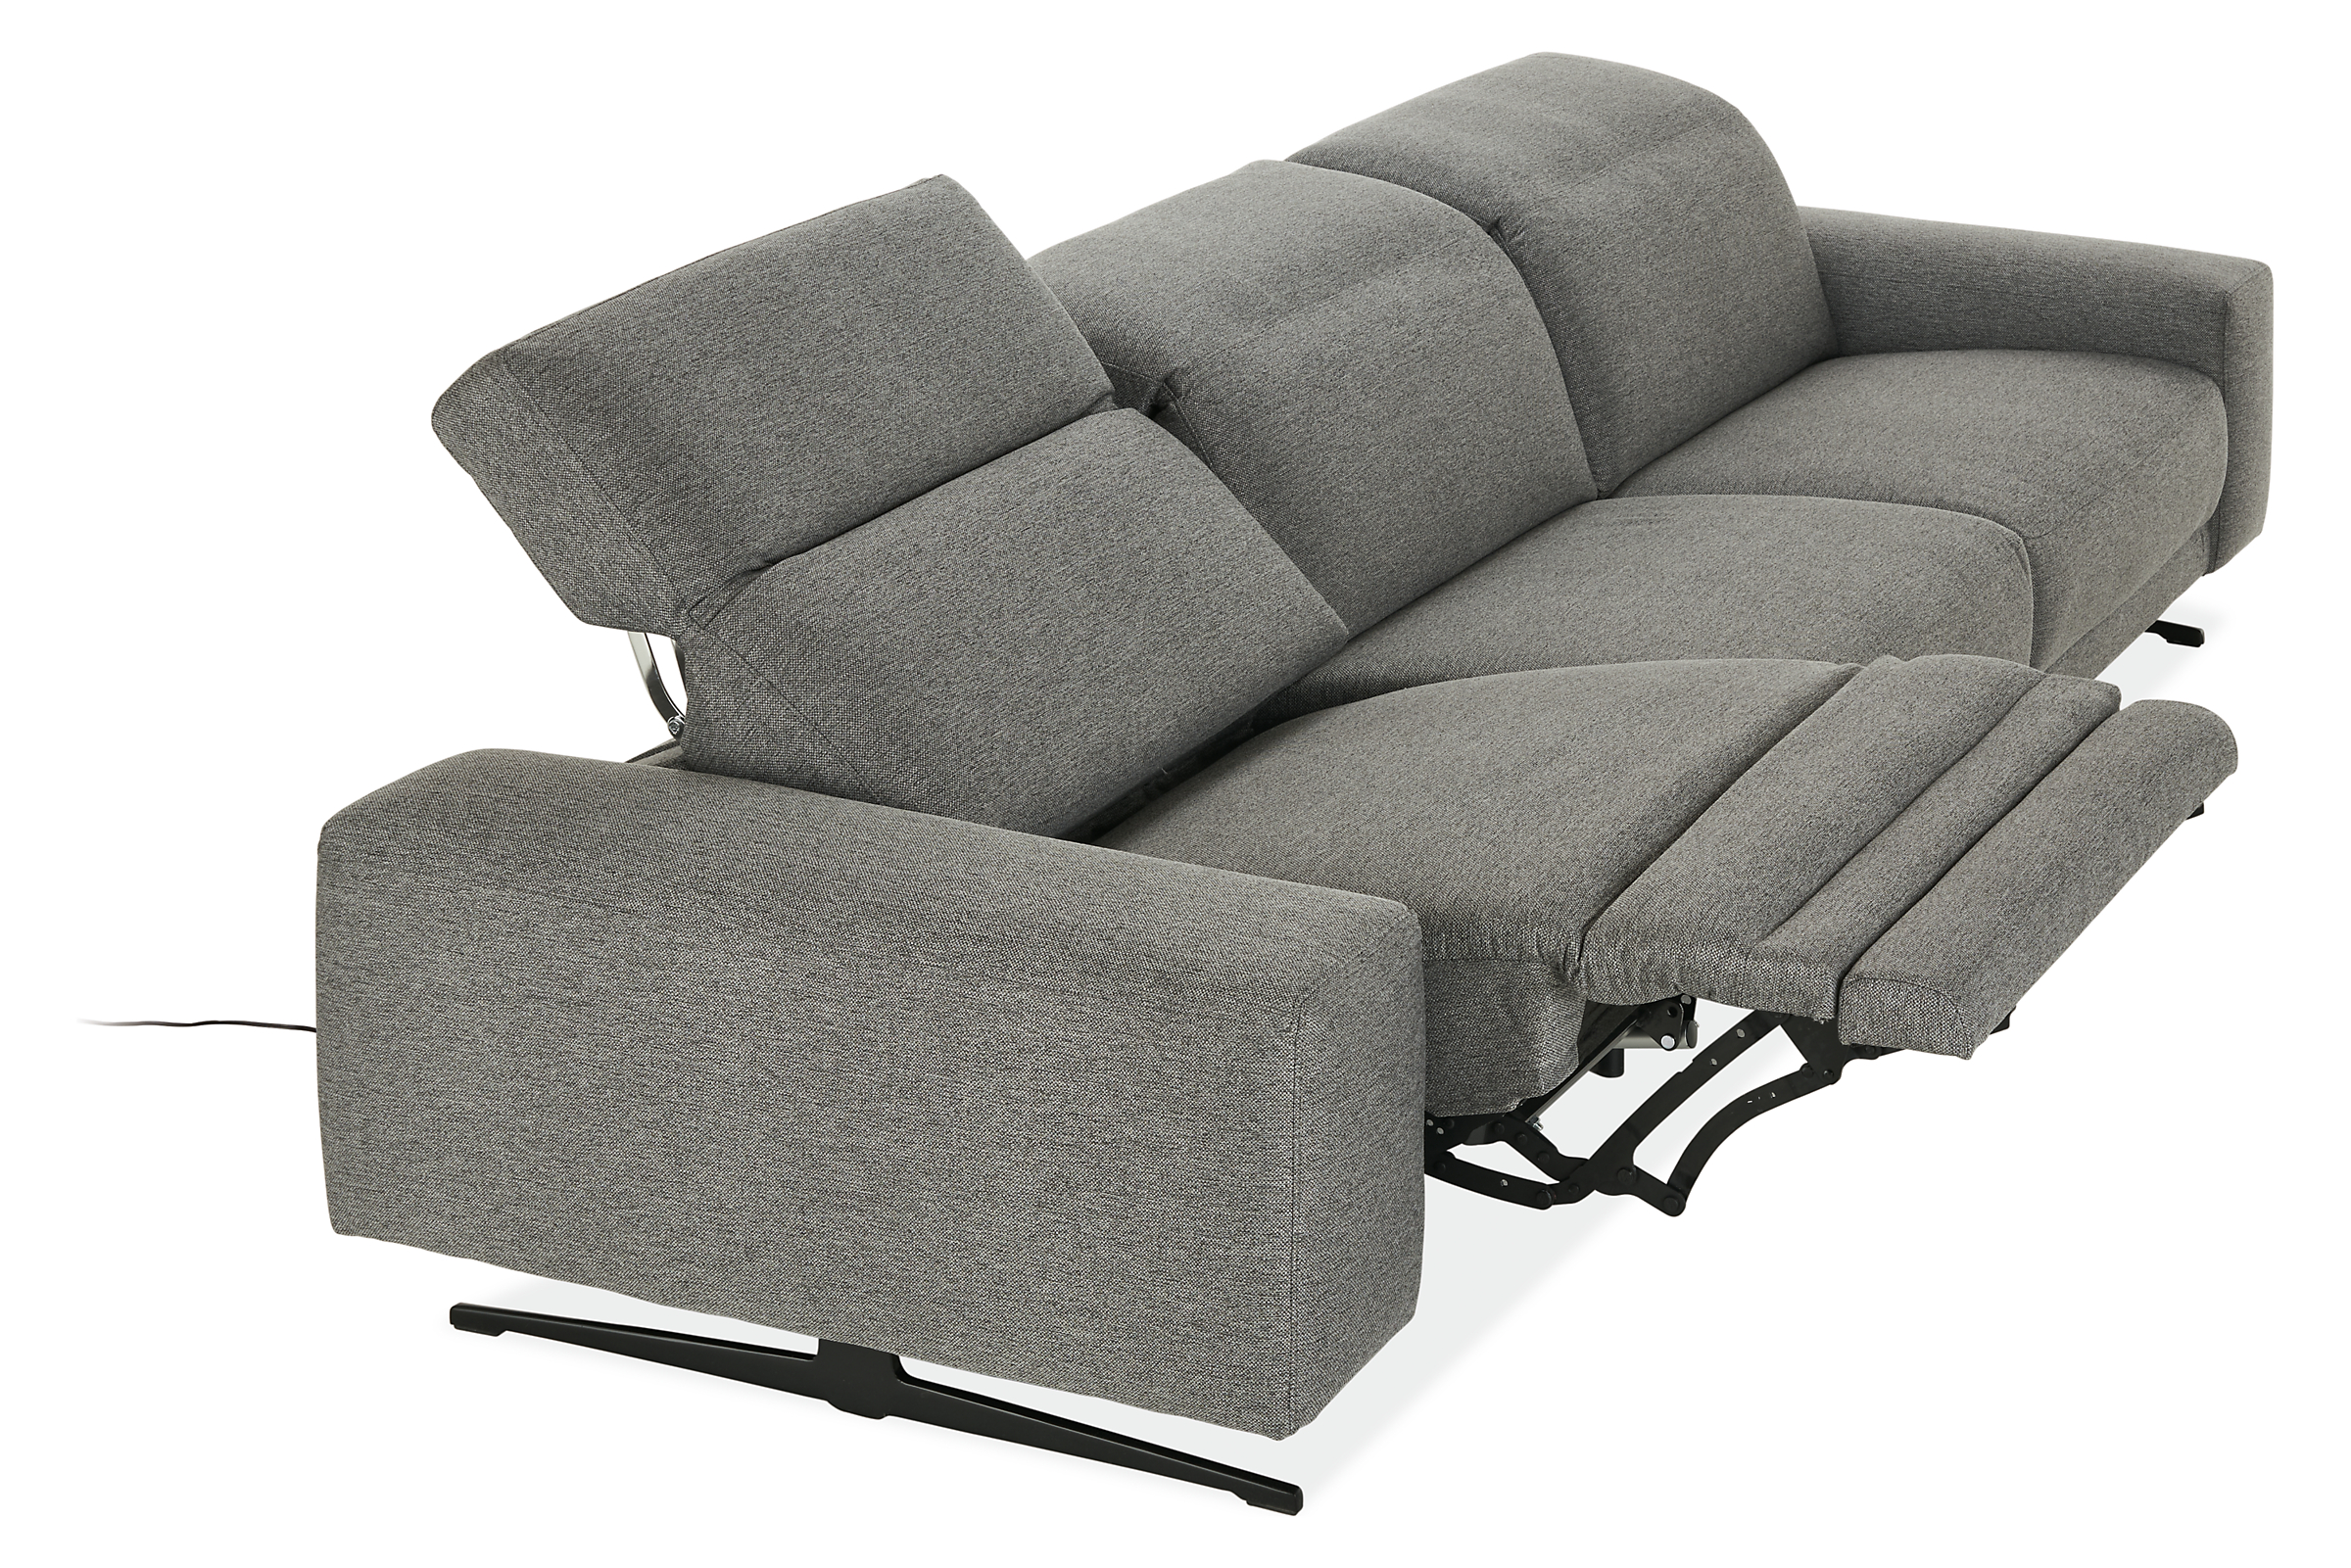 Detail of Gio 3 piece sofa with power in fabric shown in mid recline position with headrest in raised position.